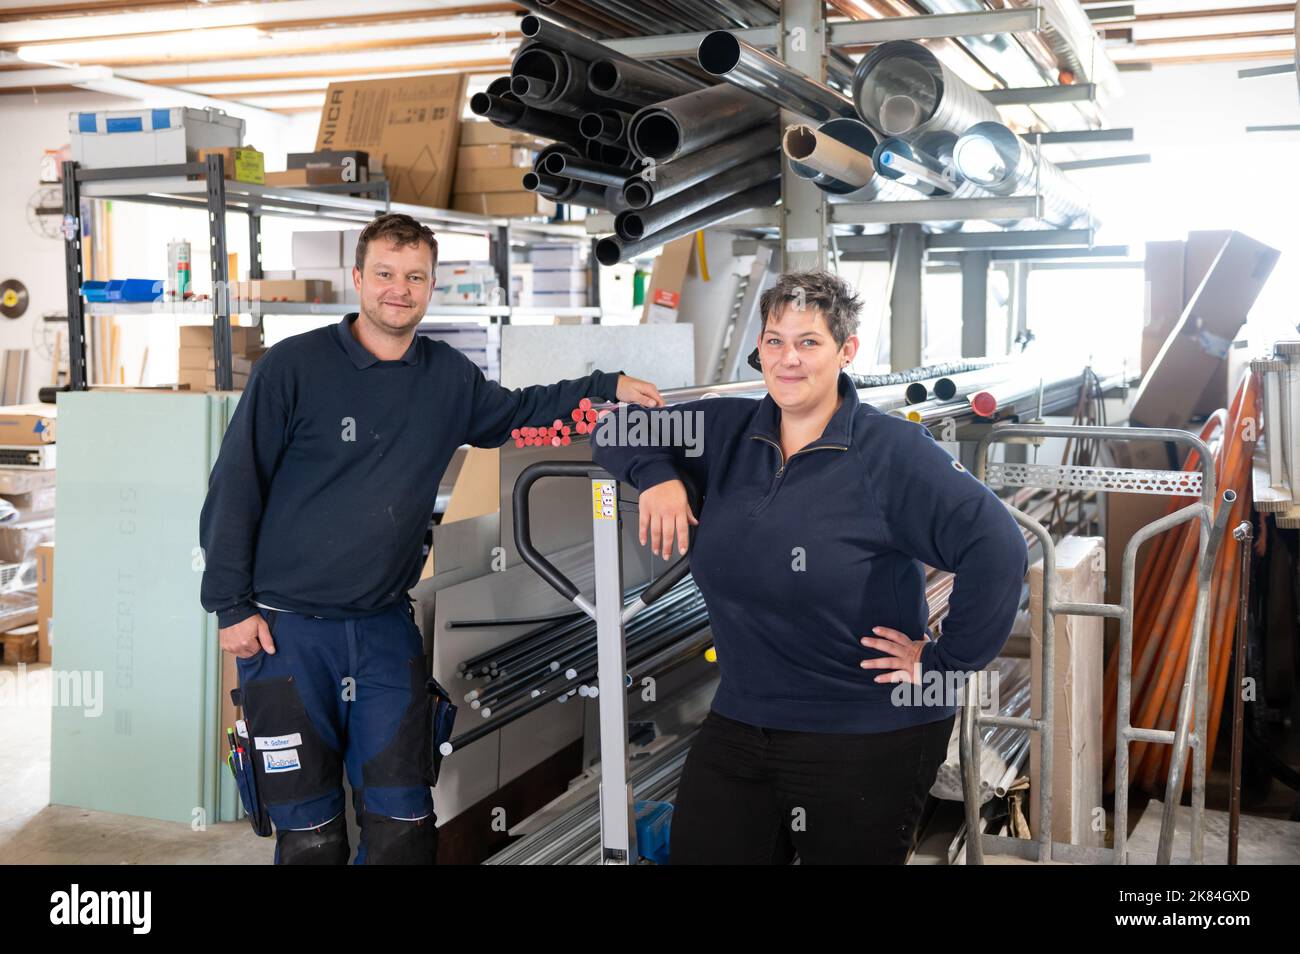 Denkingen, Germany. 11th Oct, 2022. Marcus Gaßner and his wife Ayleen  Bauser, owners of the company Gaßner Sanitär Heizung Fließen, look into the  photographer's camera in the warehouse. At the Gaßner company,